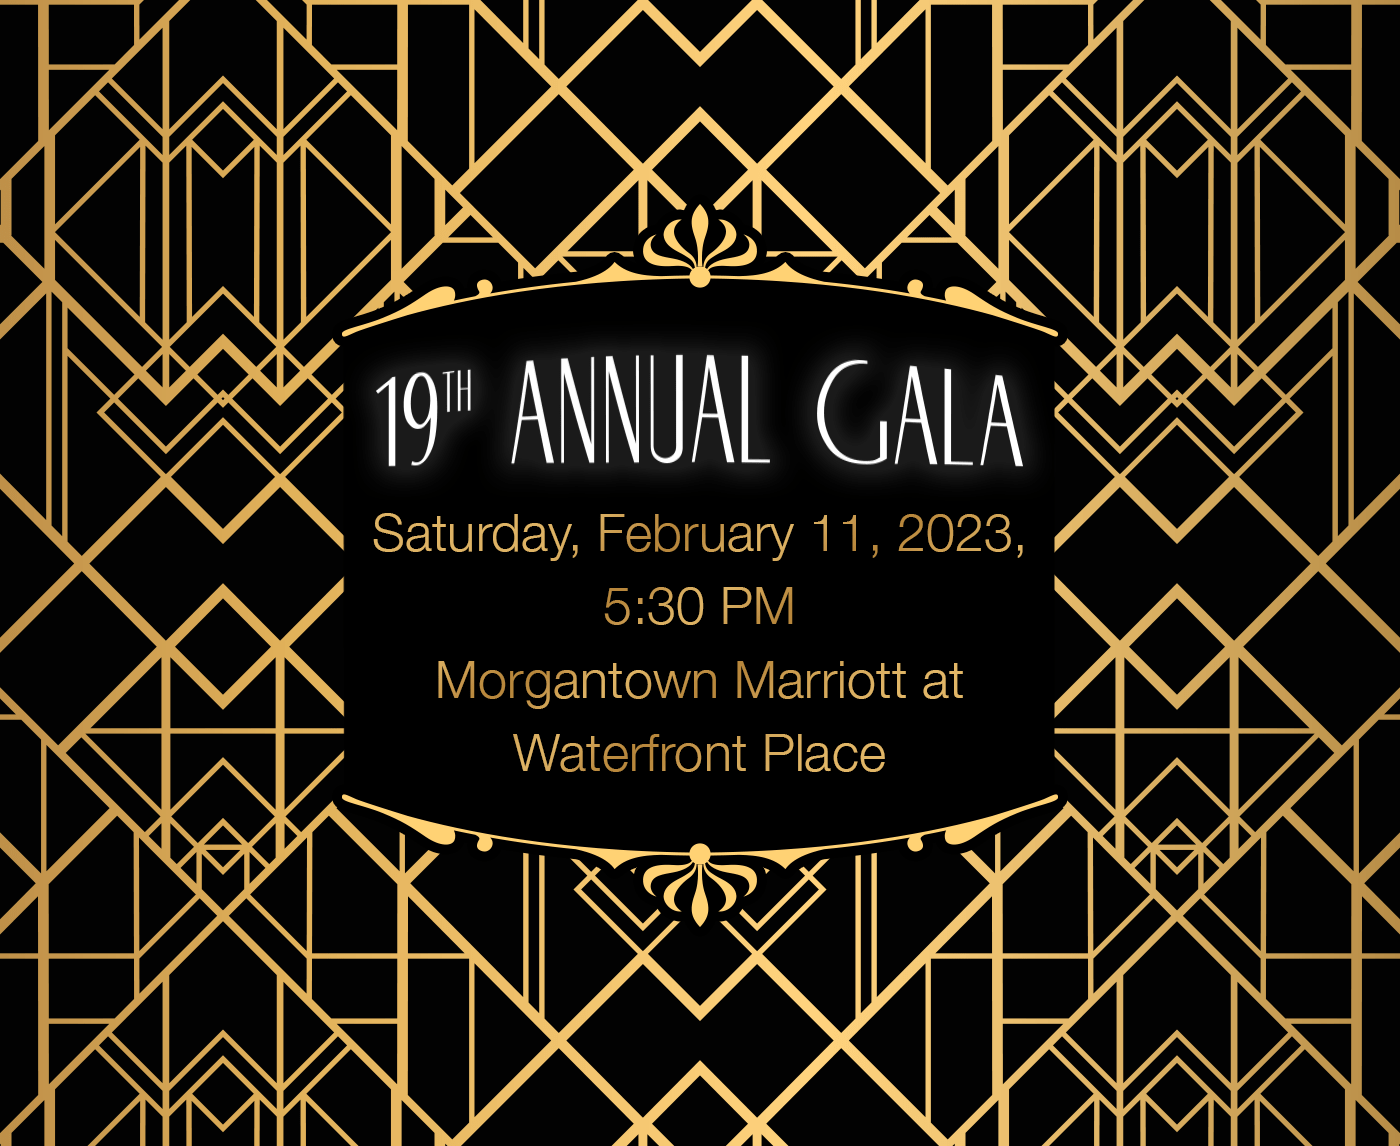 Gala Details: Saturday, February 11th, 2023 at 5:30pm. Morgantown Marriott at Waterfront Place.